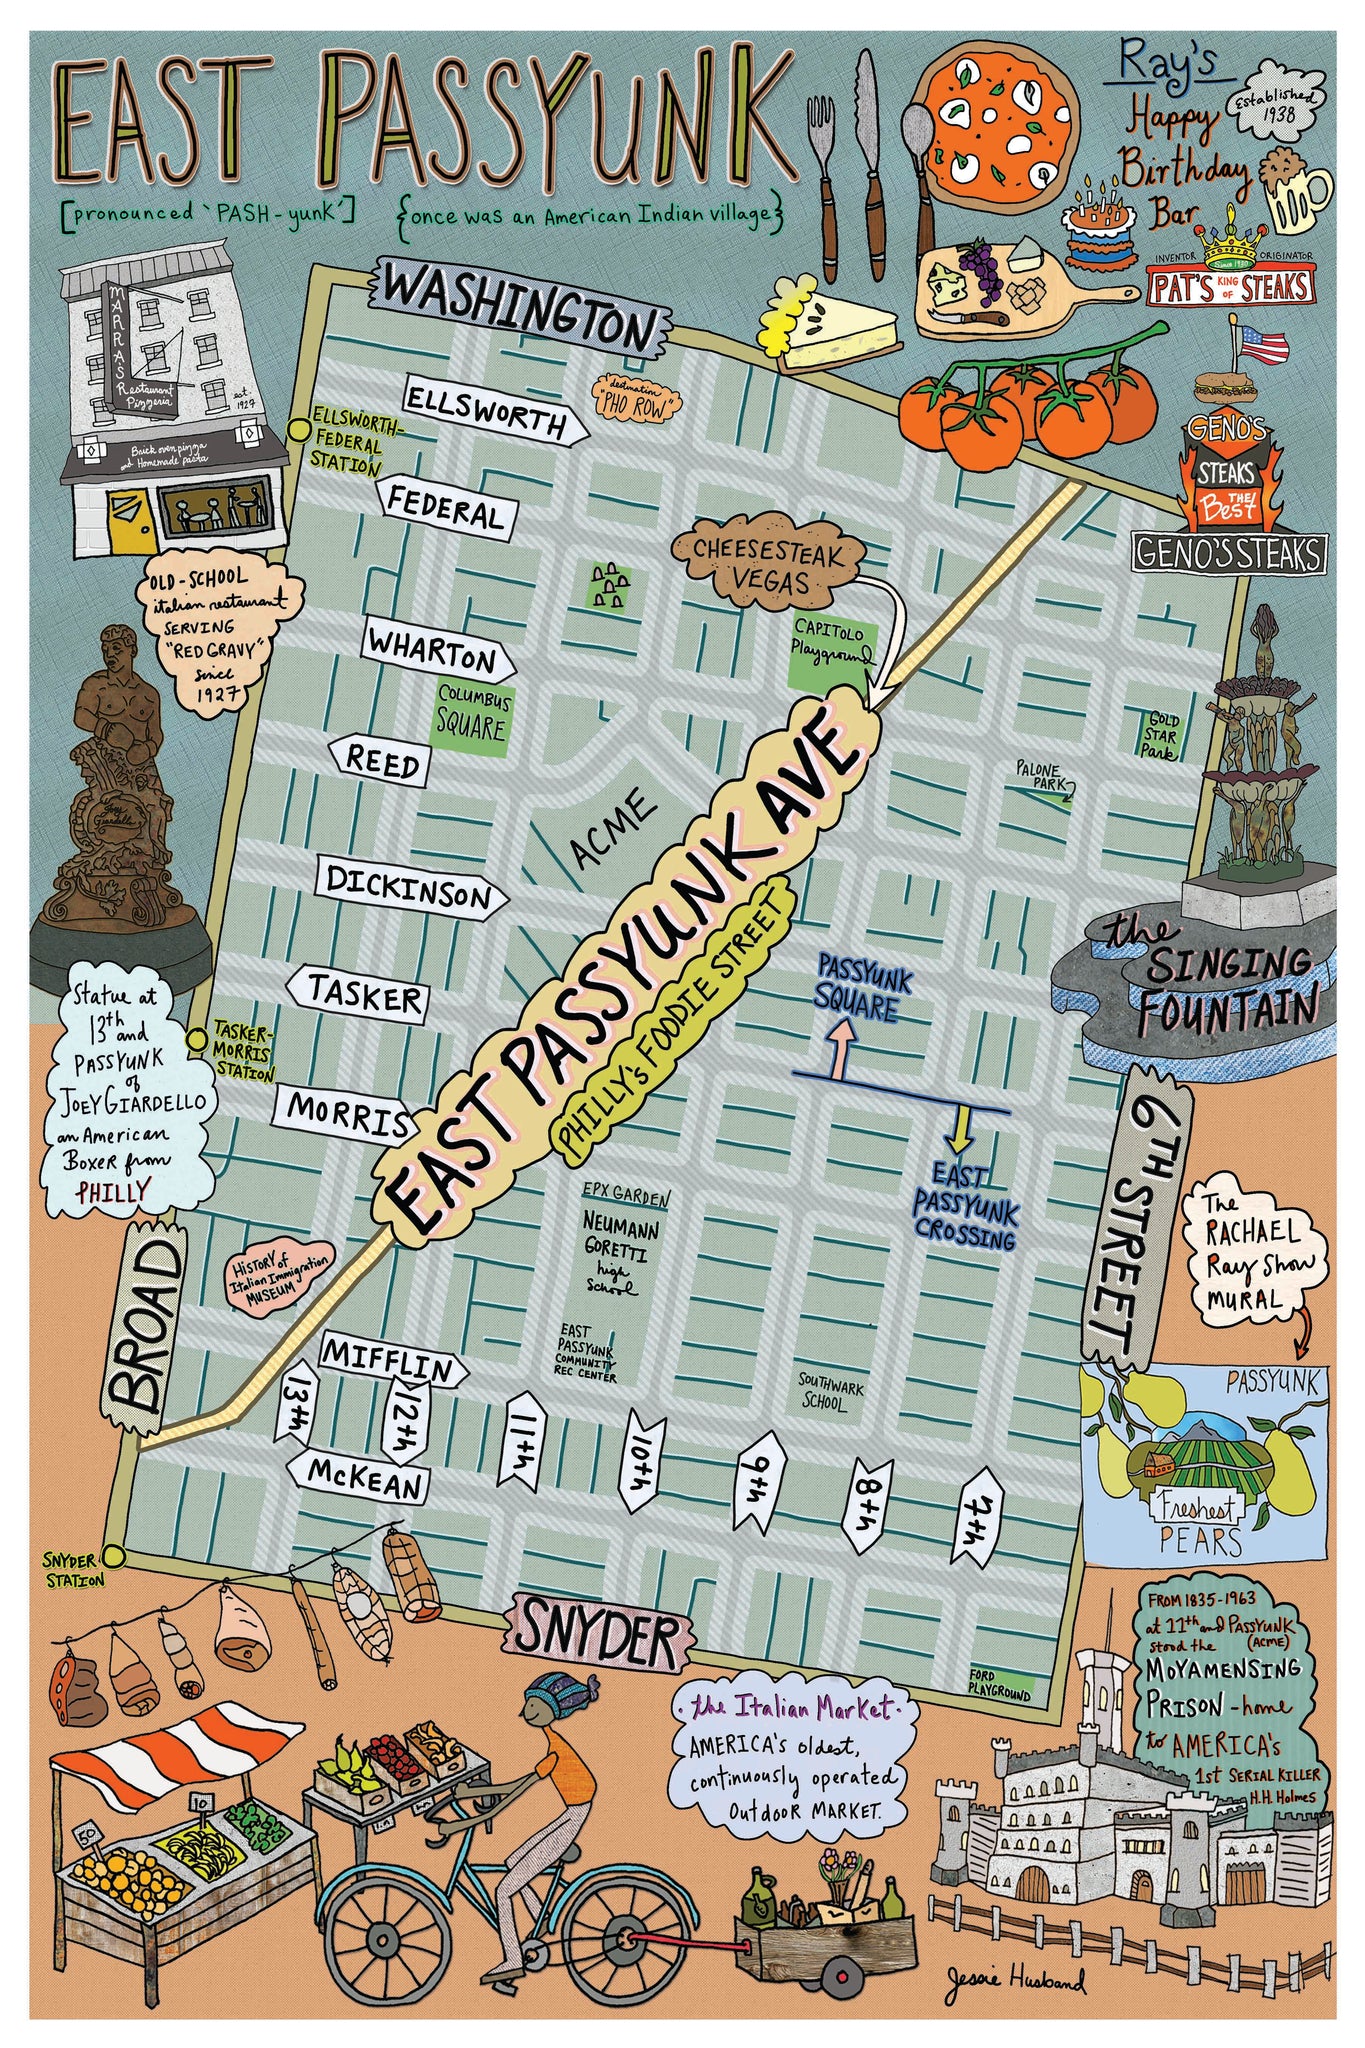 Map of East Passyunk, Philadelphia (customization and framing options available) - Jessie husband